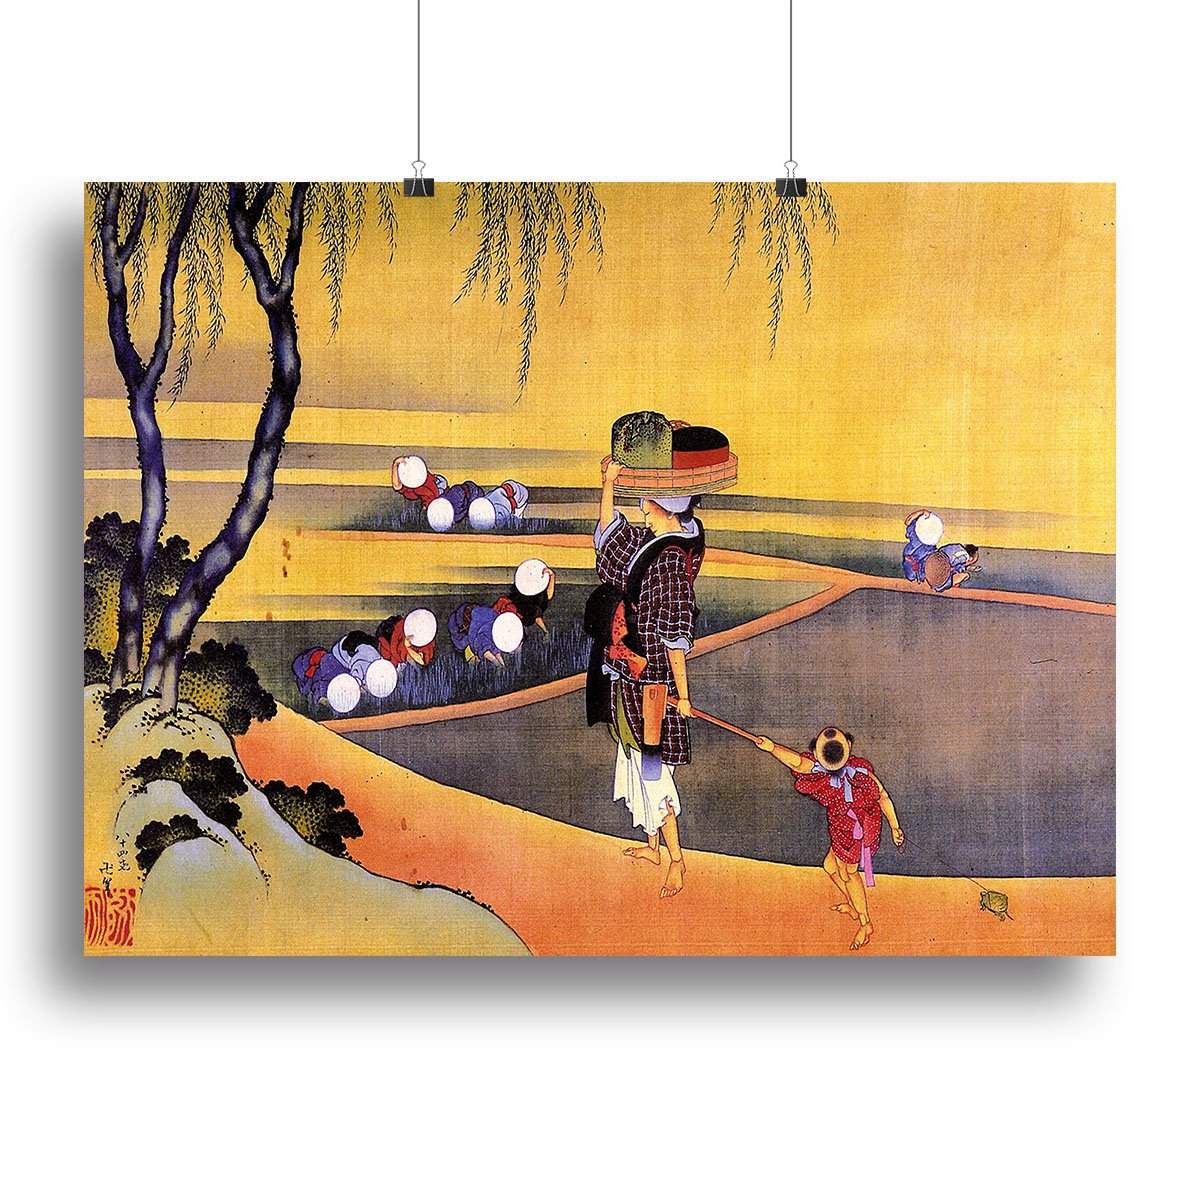 Rice fields by Hokusai Canvas Print or Poster